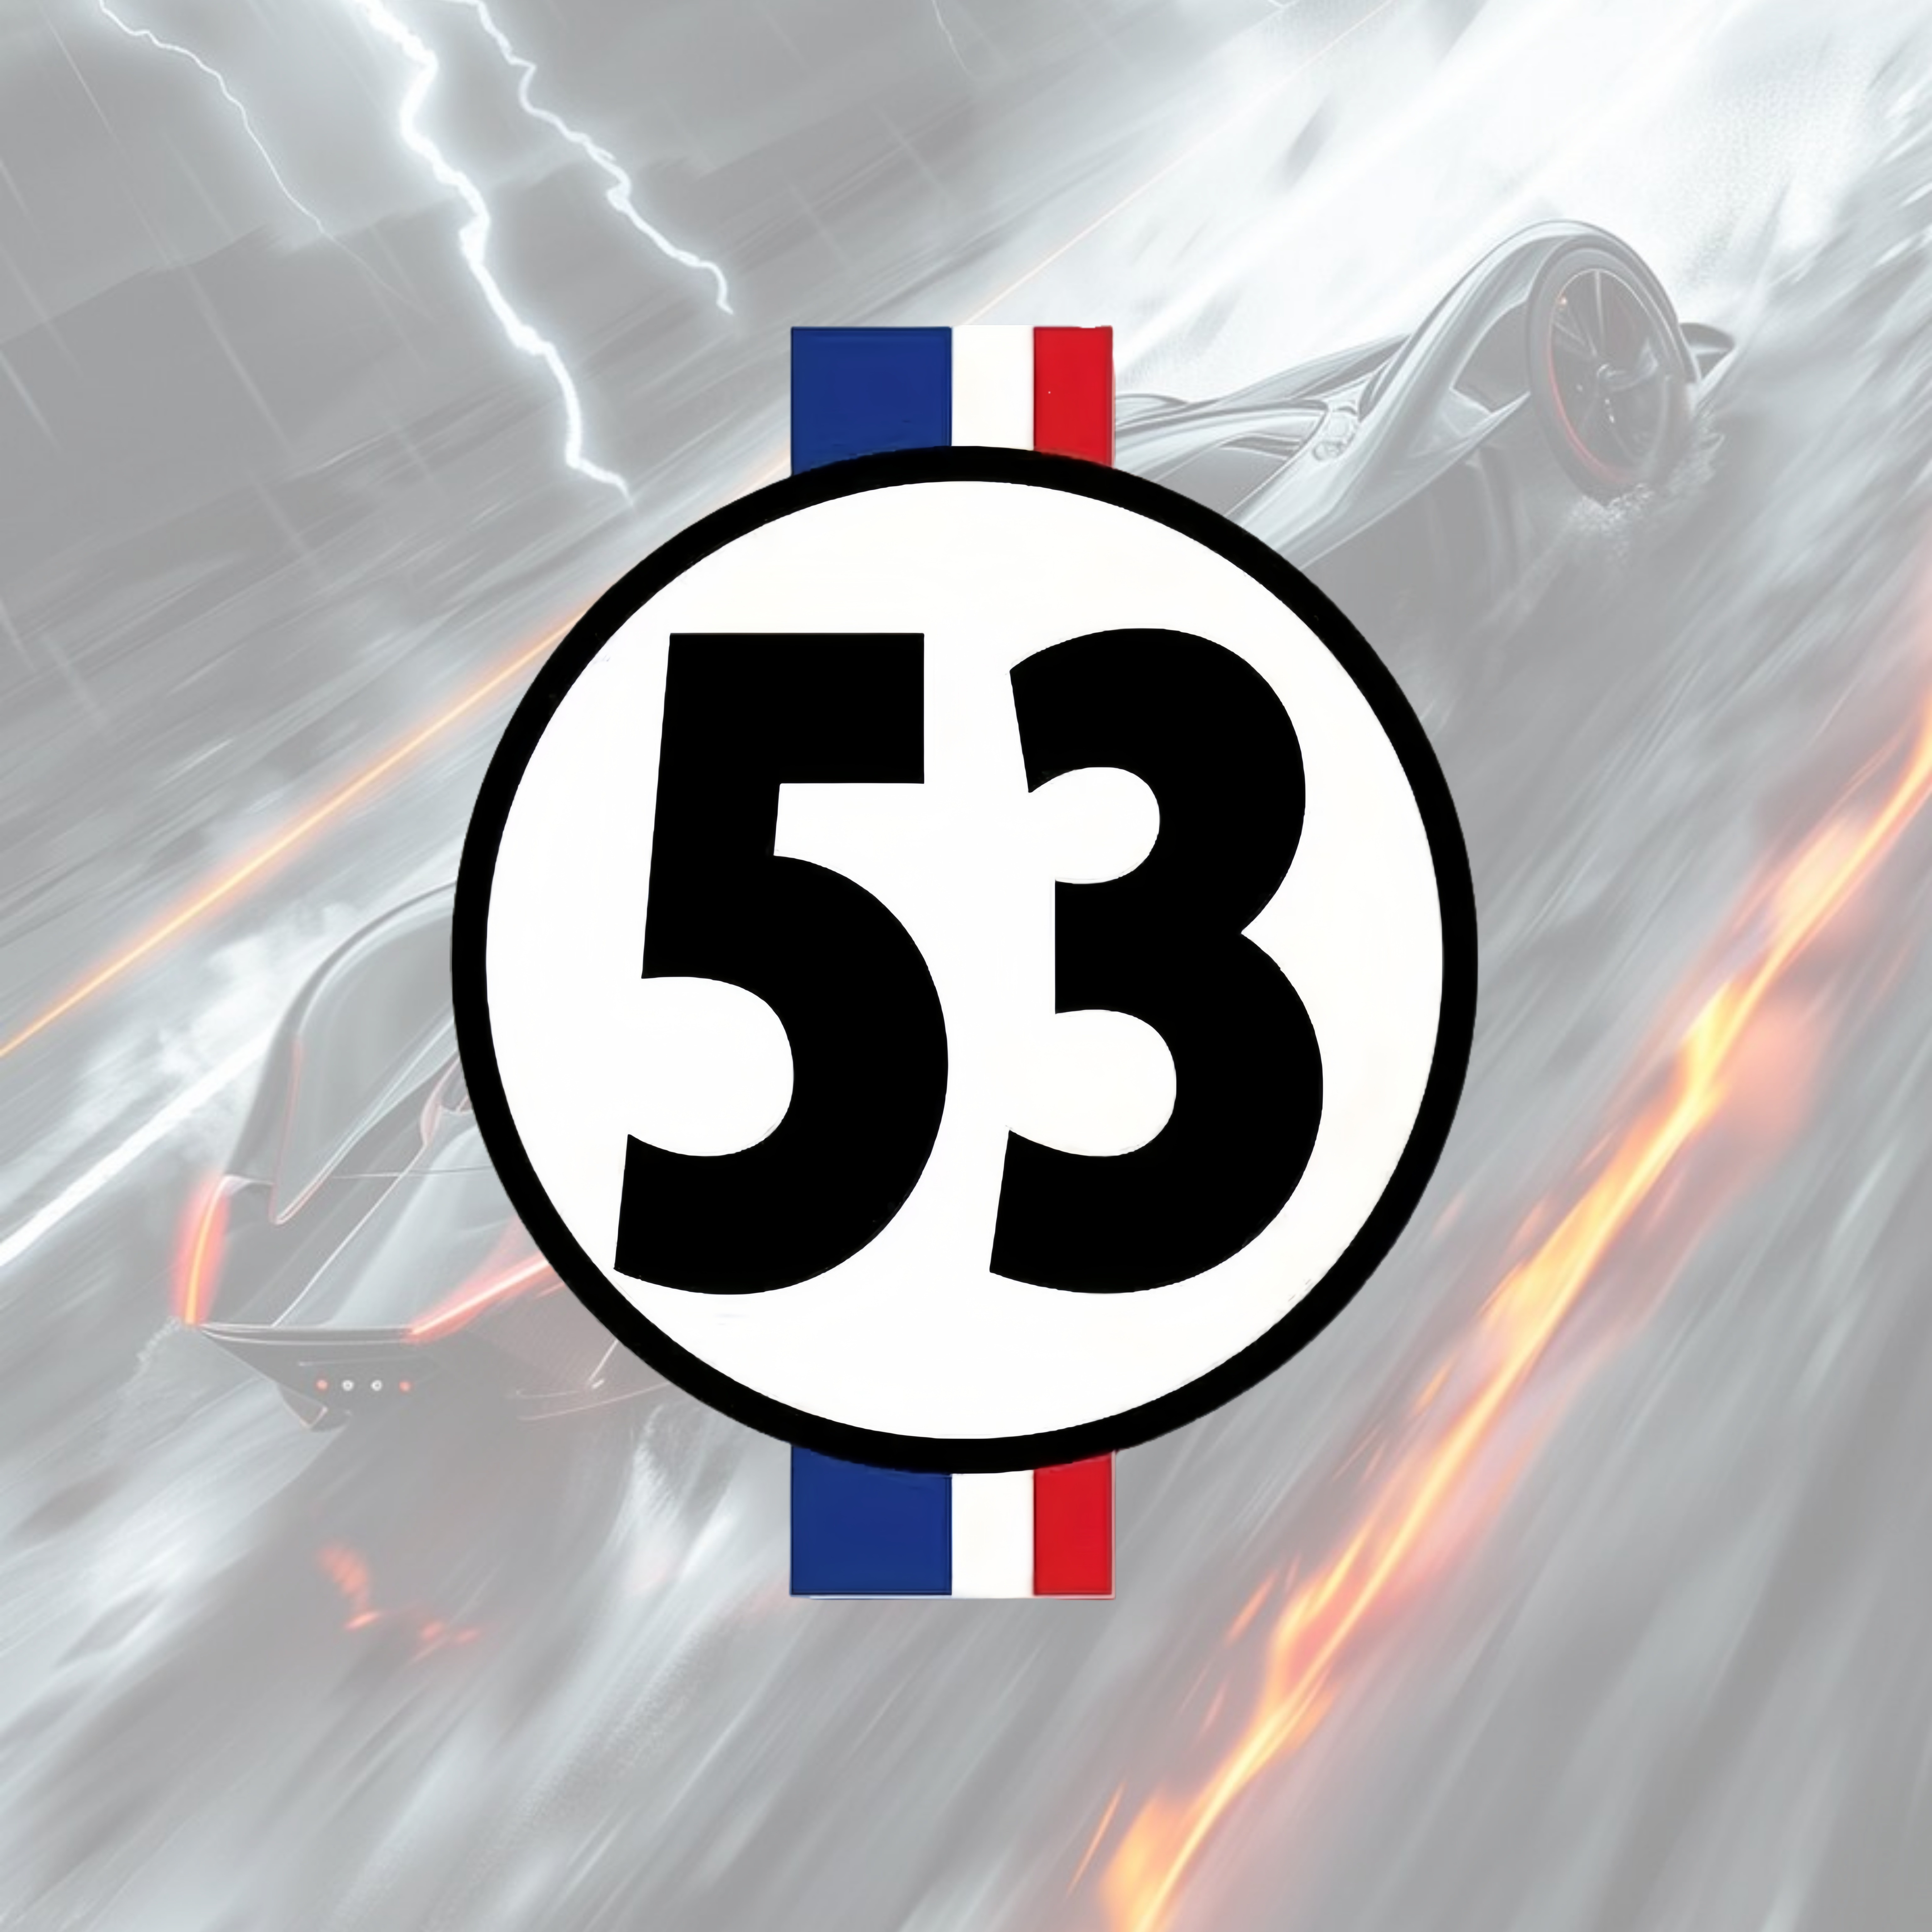 

1pc Number 53 Racing Decal Sticker - Pe Polyethylene Waterproof Self-adhesive For Cars, Motorcycles, Laptops, Skateboards Decor